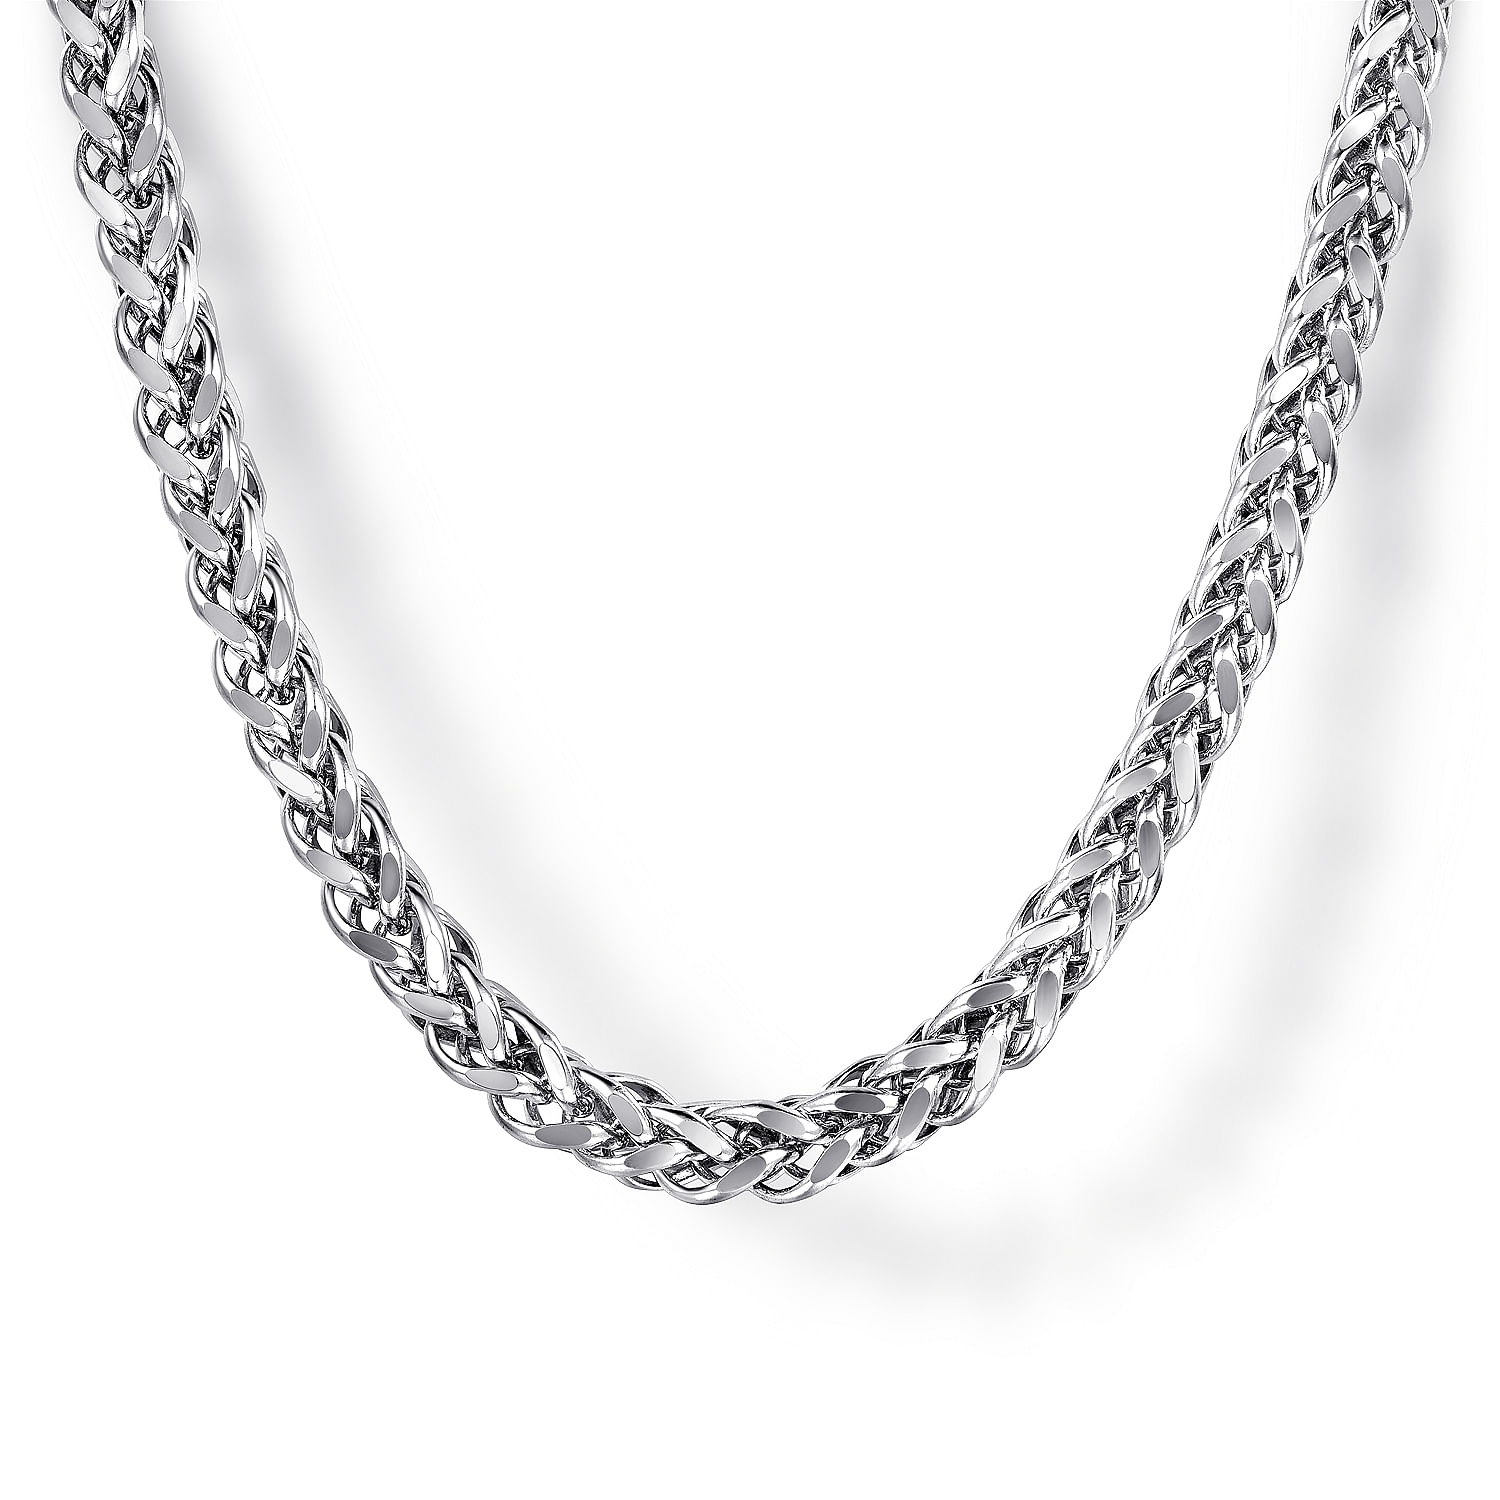 24 Inch 925 Sterling Silver Men's Wheat Chain Necklace 